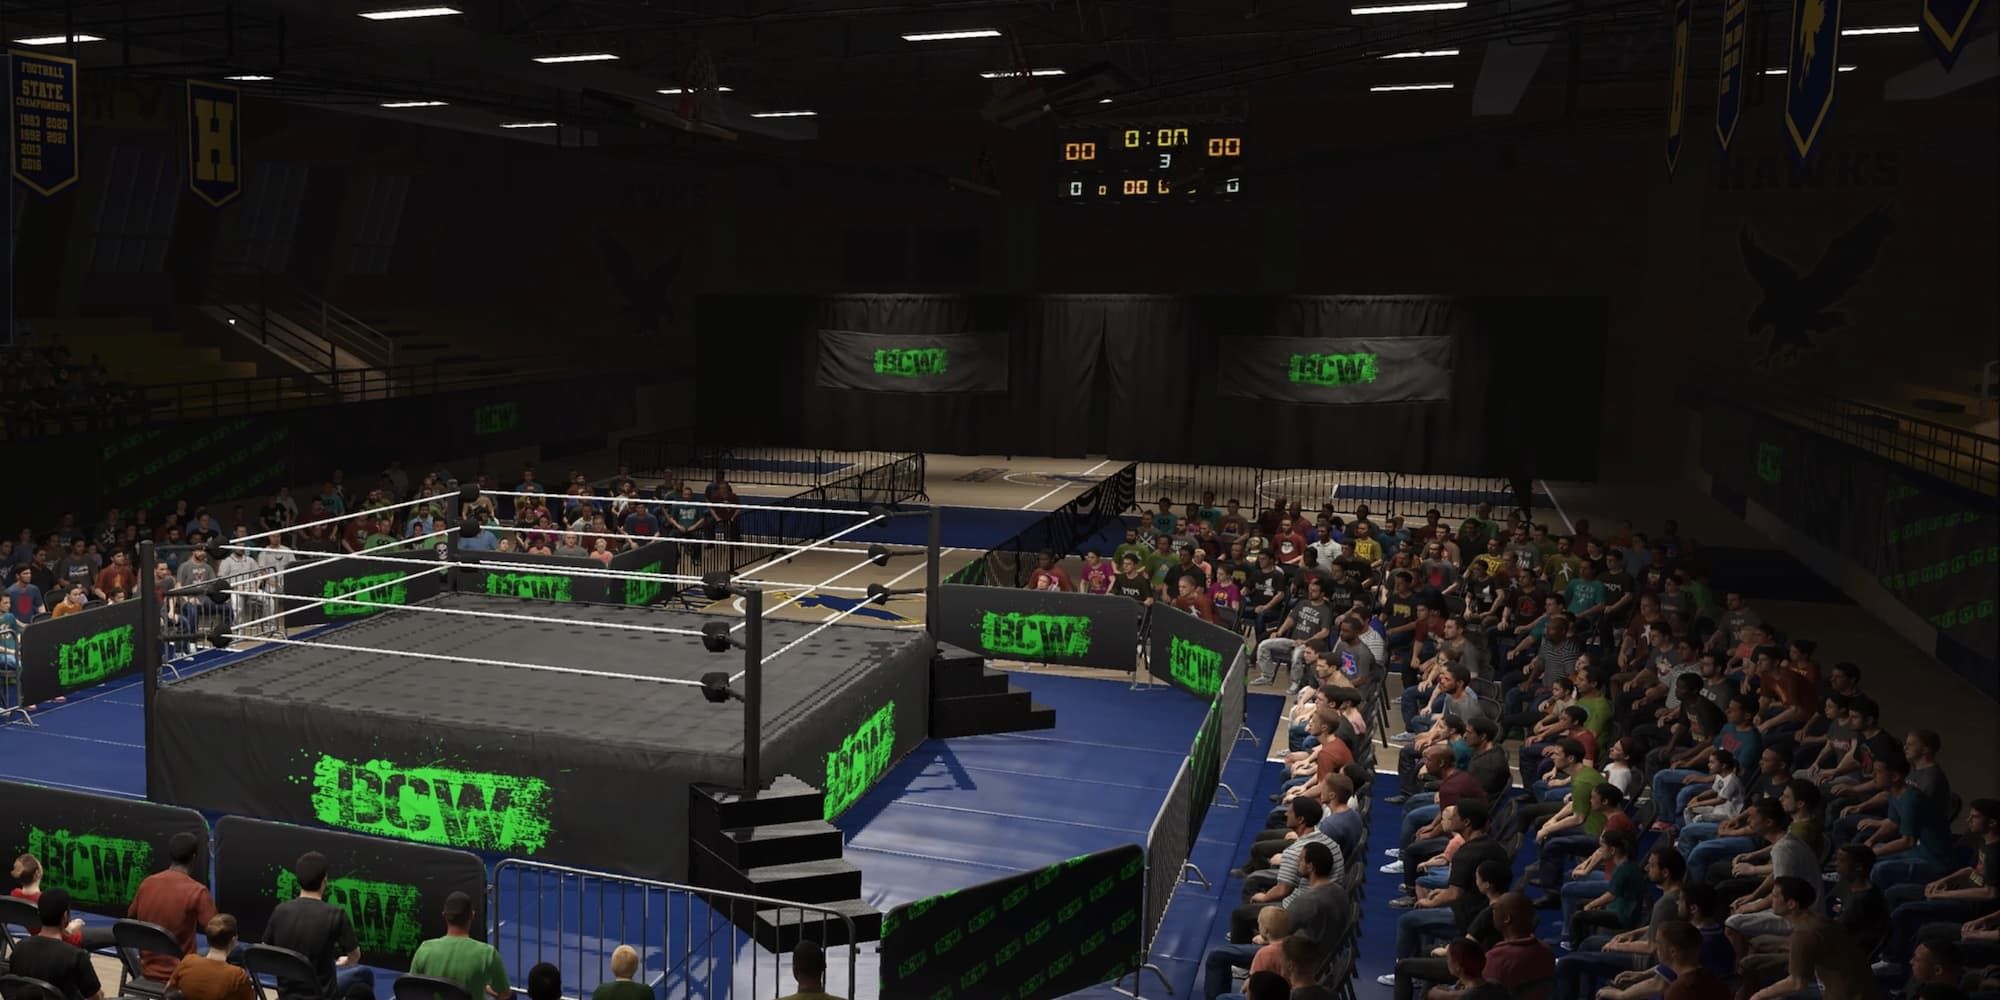 The High School Gym arena in WWE 2K23 is small with school banners and a scoreboard above the entrance area.